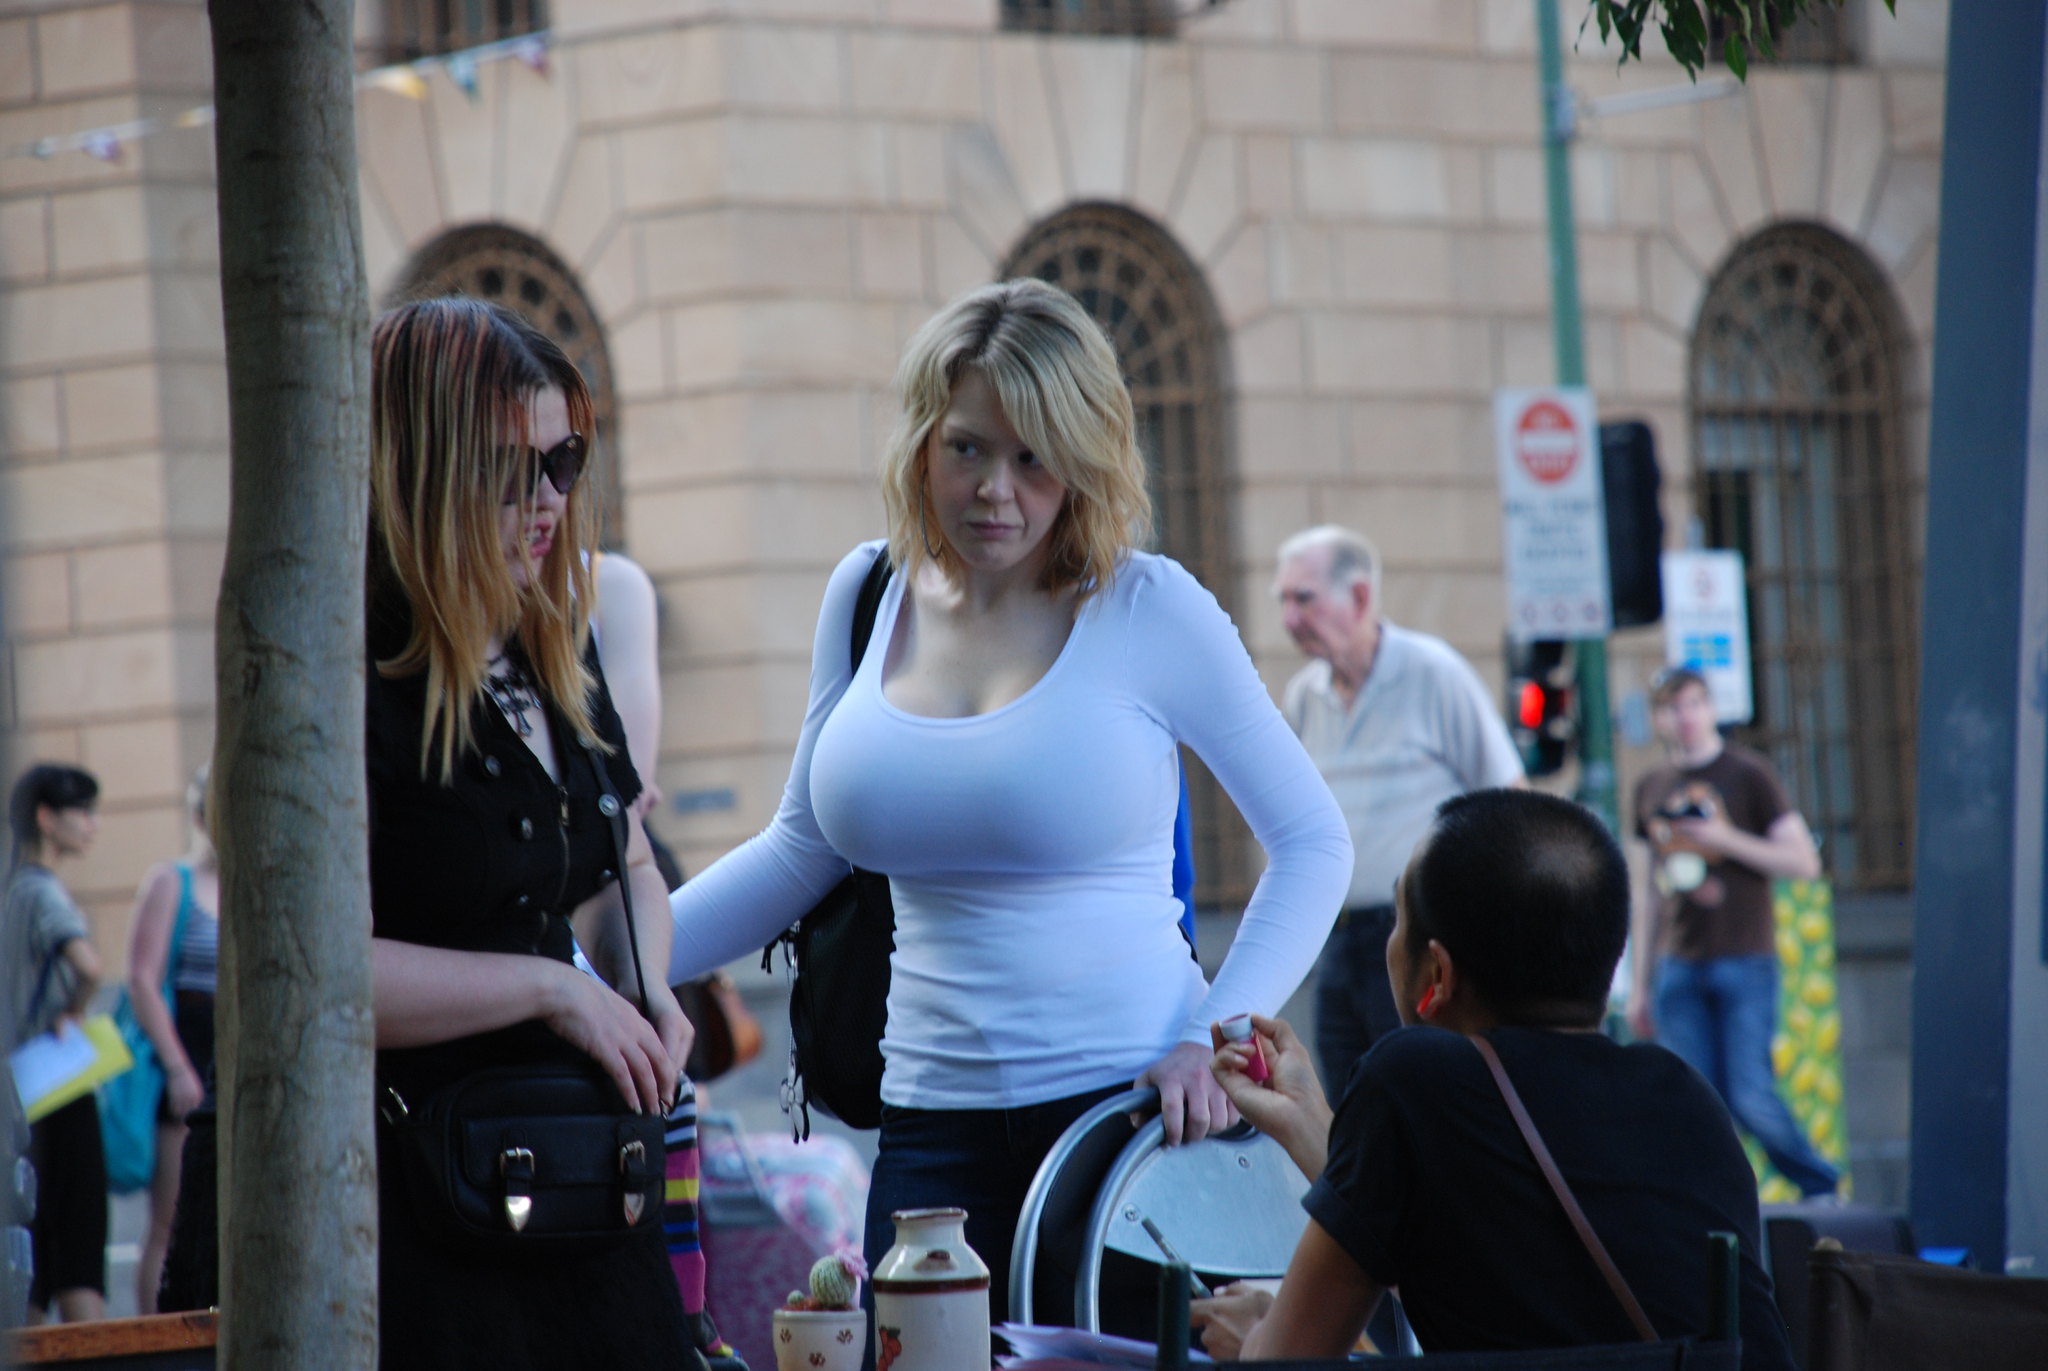 More related candid busty women in public.